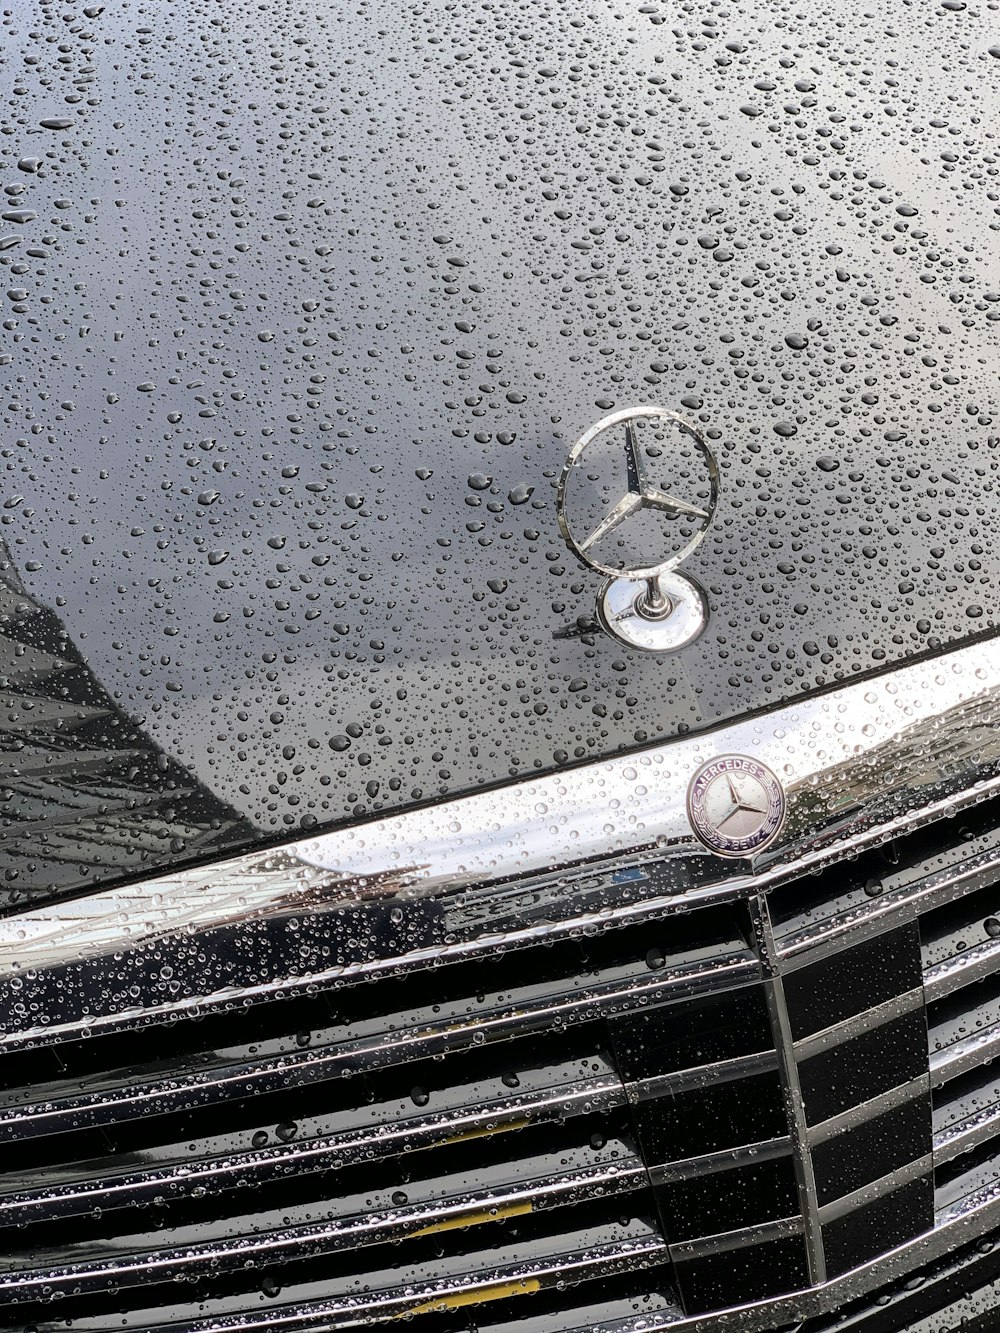 water droplets on silver car